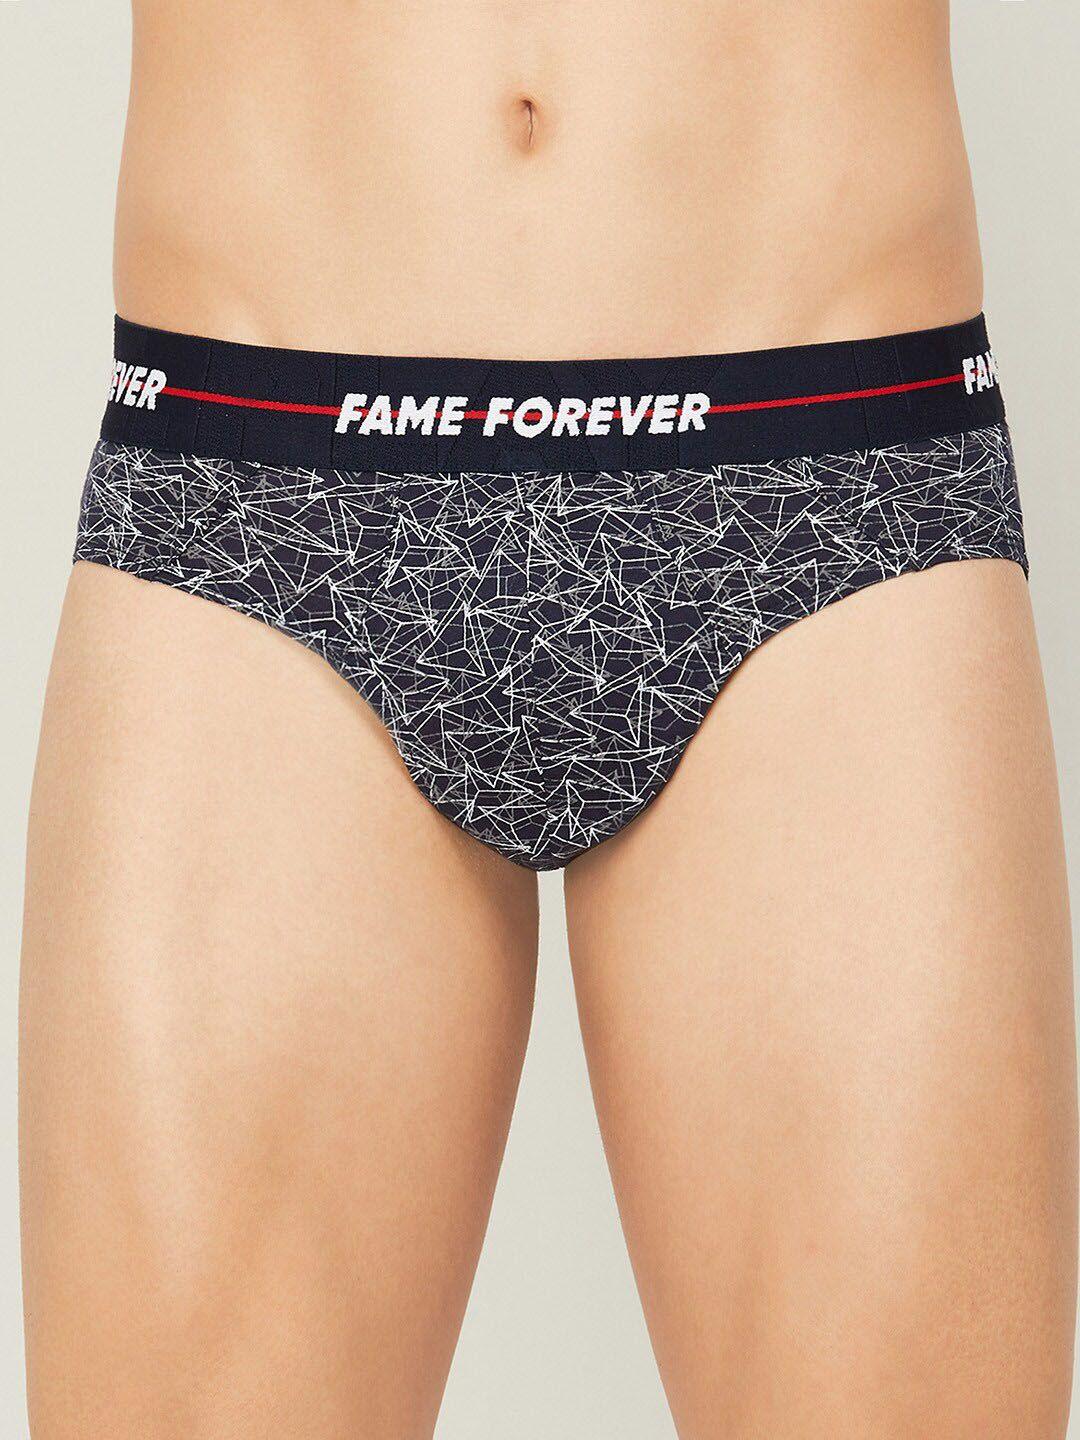 fame-forever-by-lifestyle--men-printed-cotton-basic-briefs